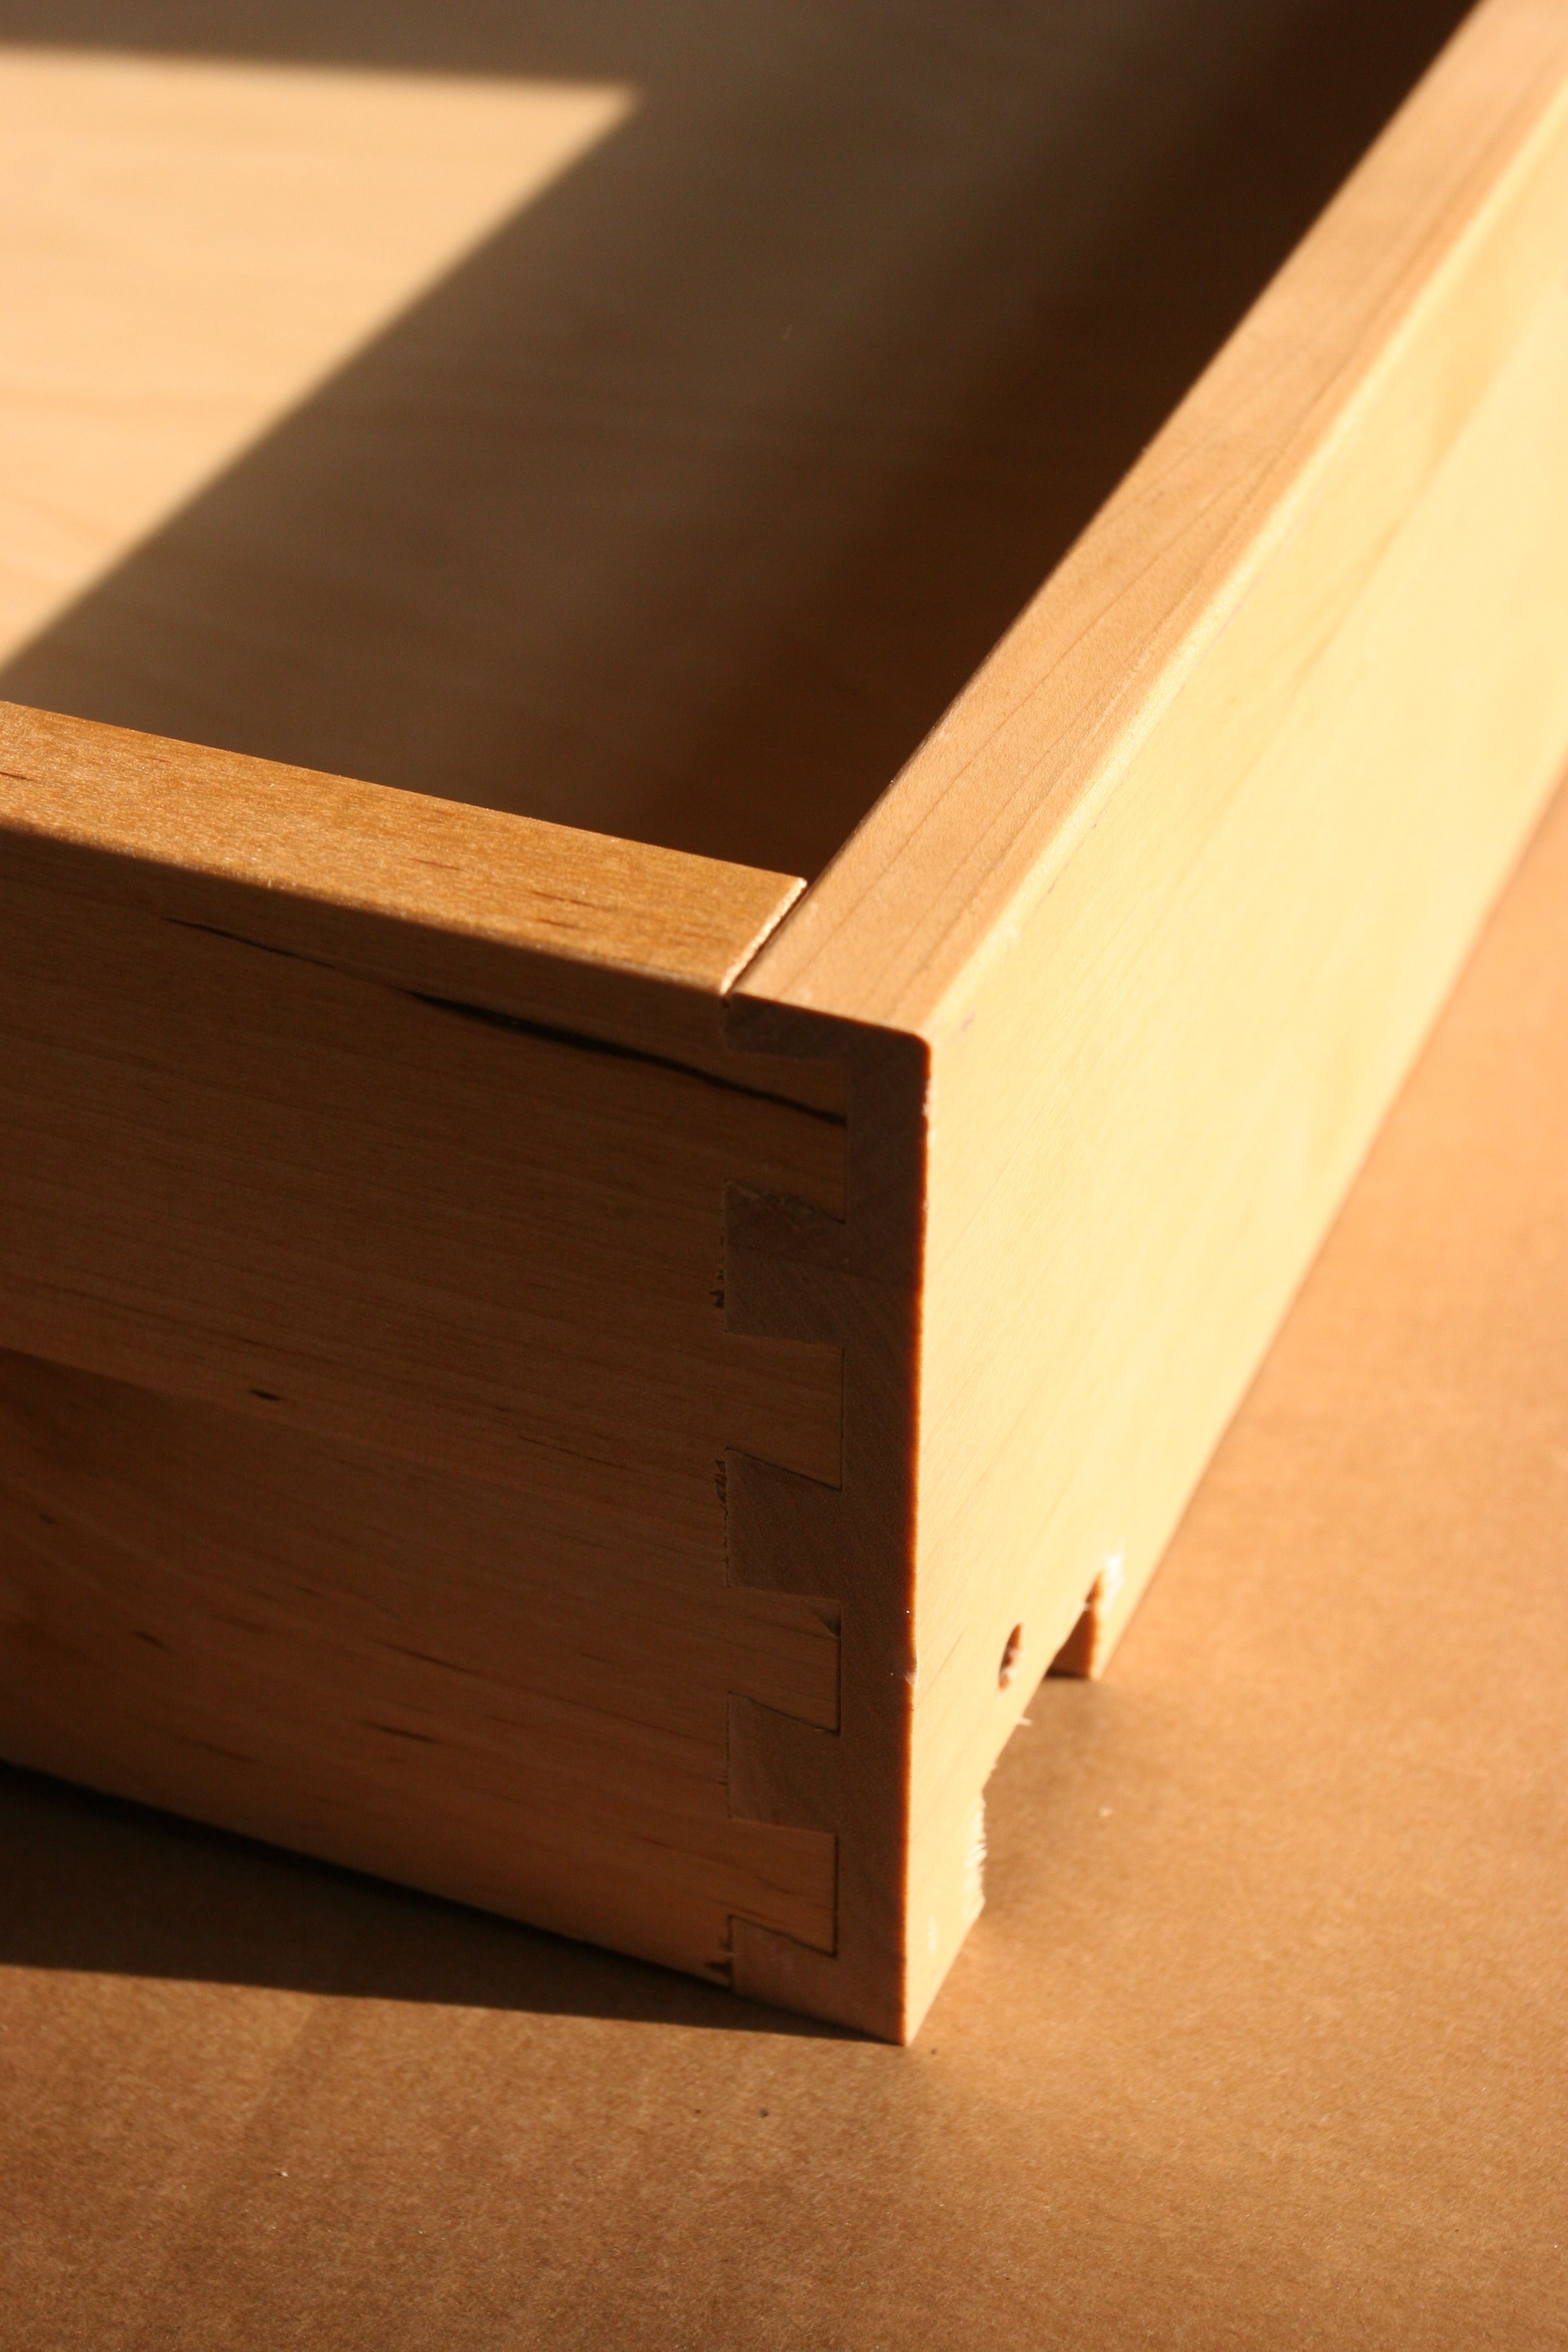 A good point about the cabinets: dovetail joinery on the drawers, front and back. So that's good.